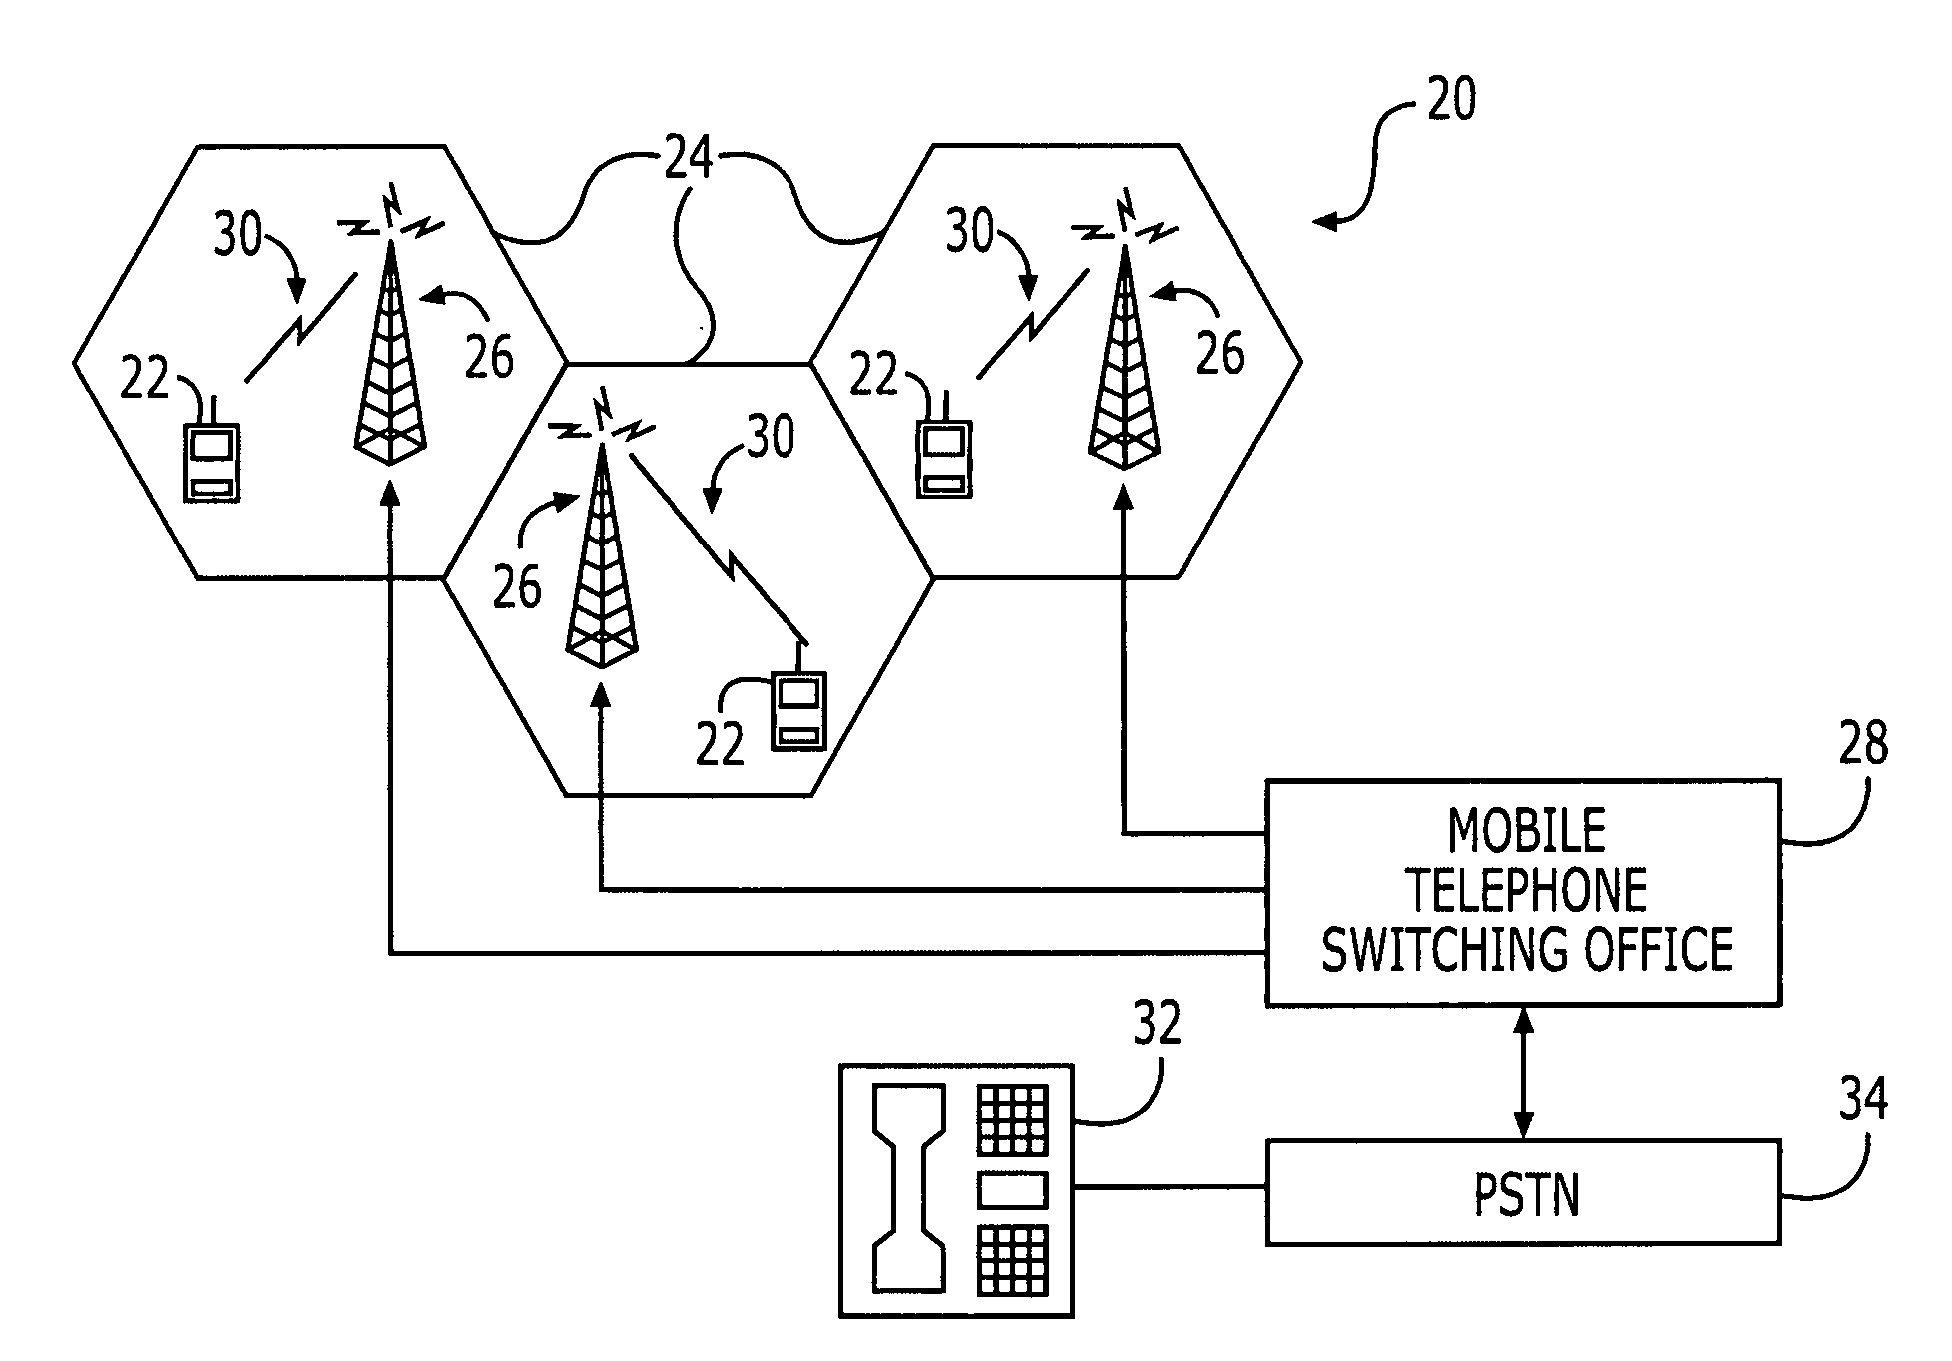 Cooperative global positioning system (GPS) processing by mobile terminals that communicate via an ad hoc wireless network